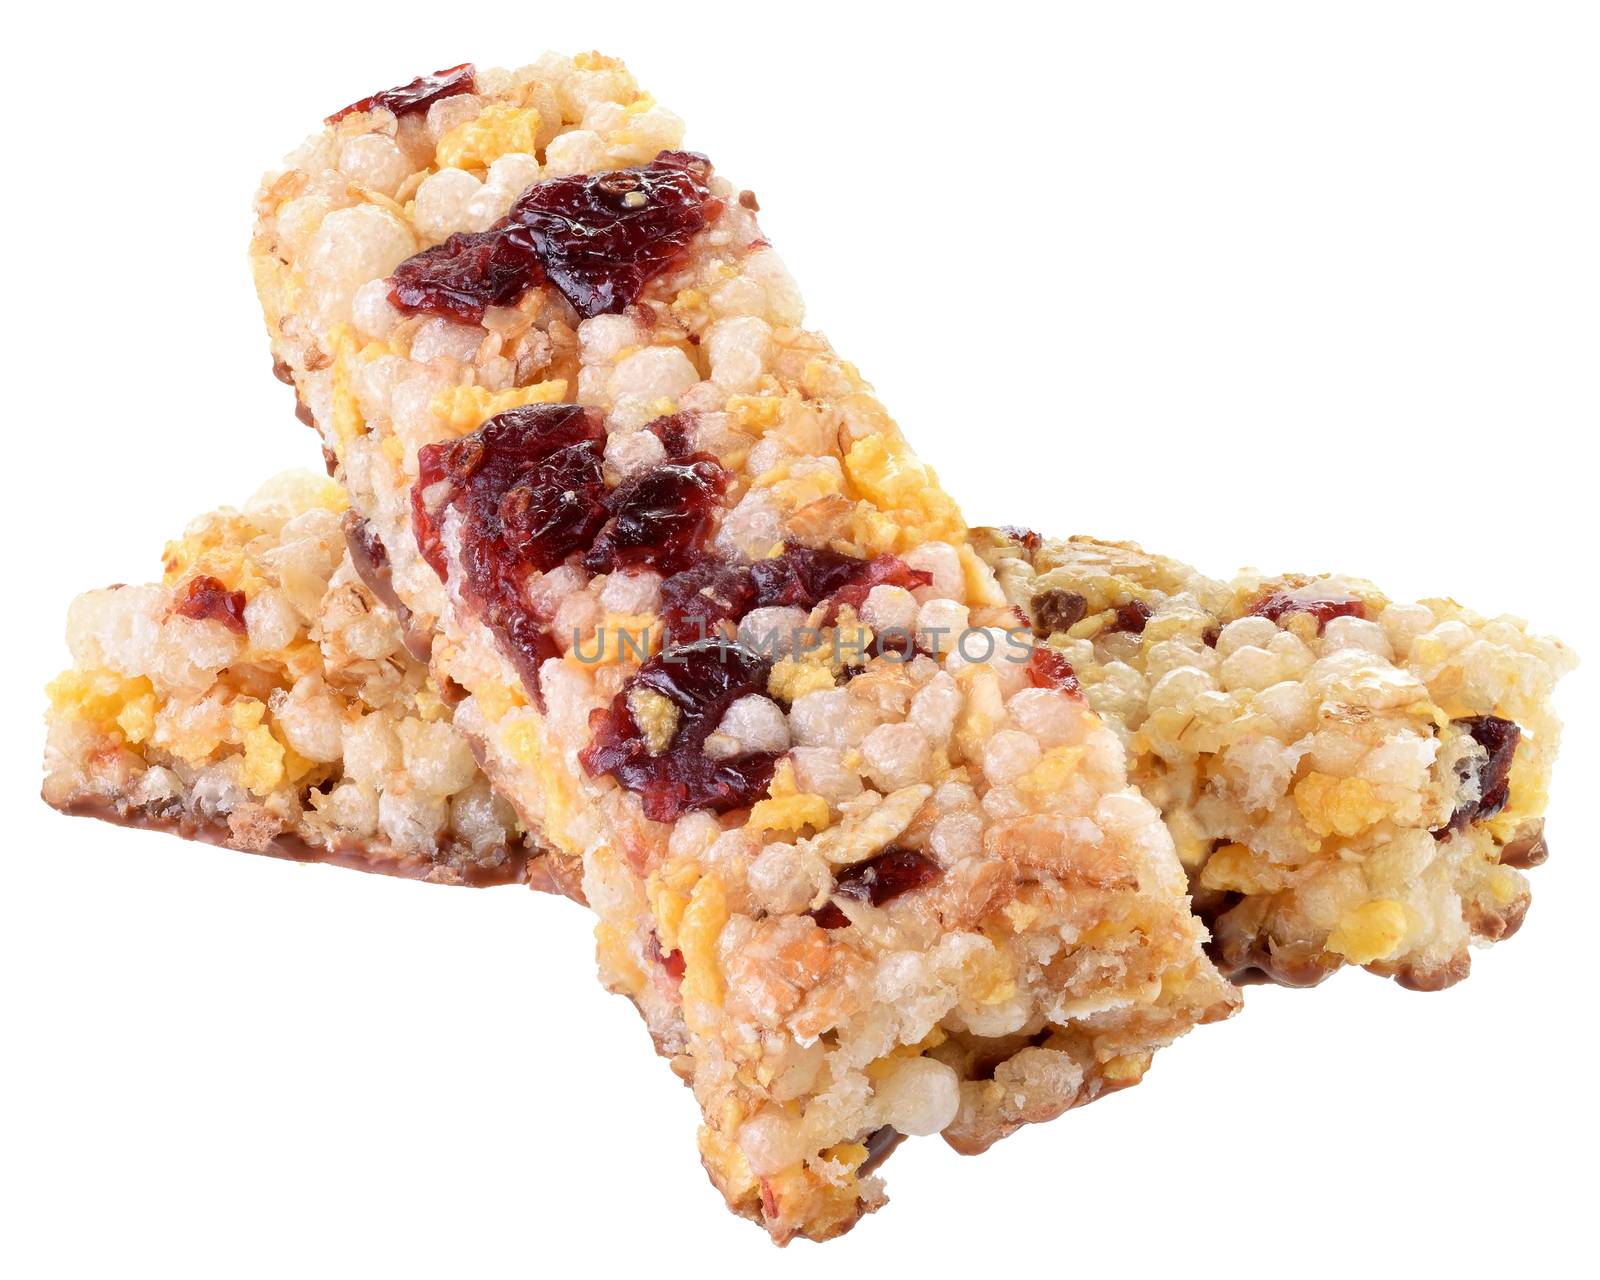 Whole-cereal bar with cranberries and puffed rice.